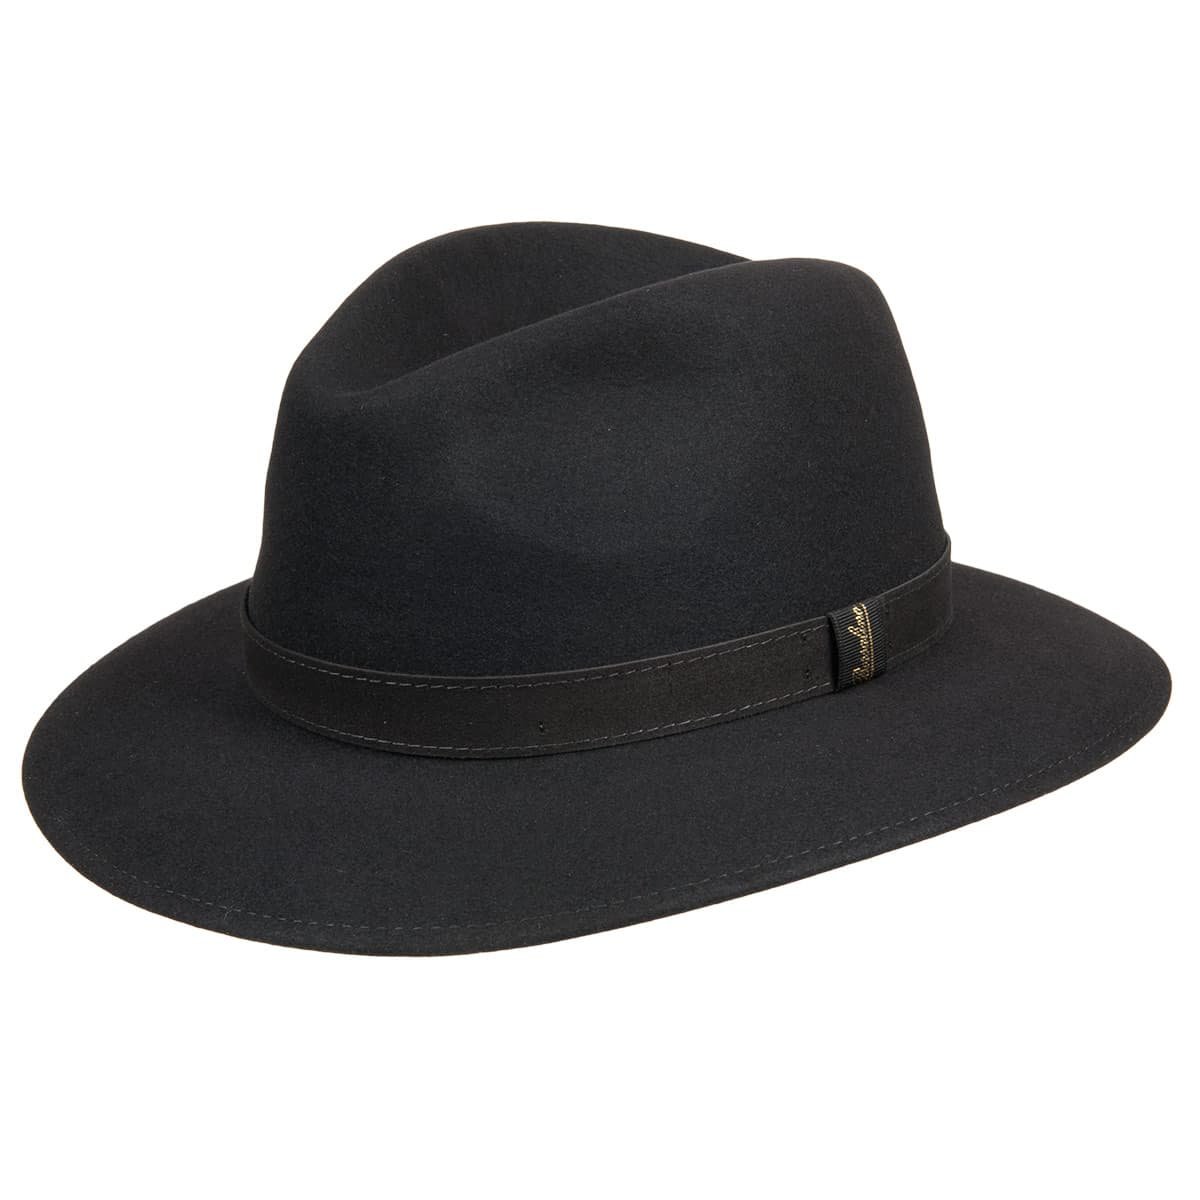 Men' hat by Borsalino Traveller of fur felt with a sporty leather strap set